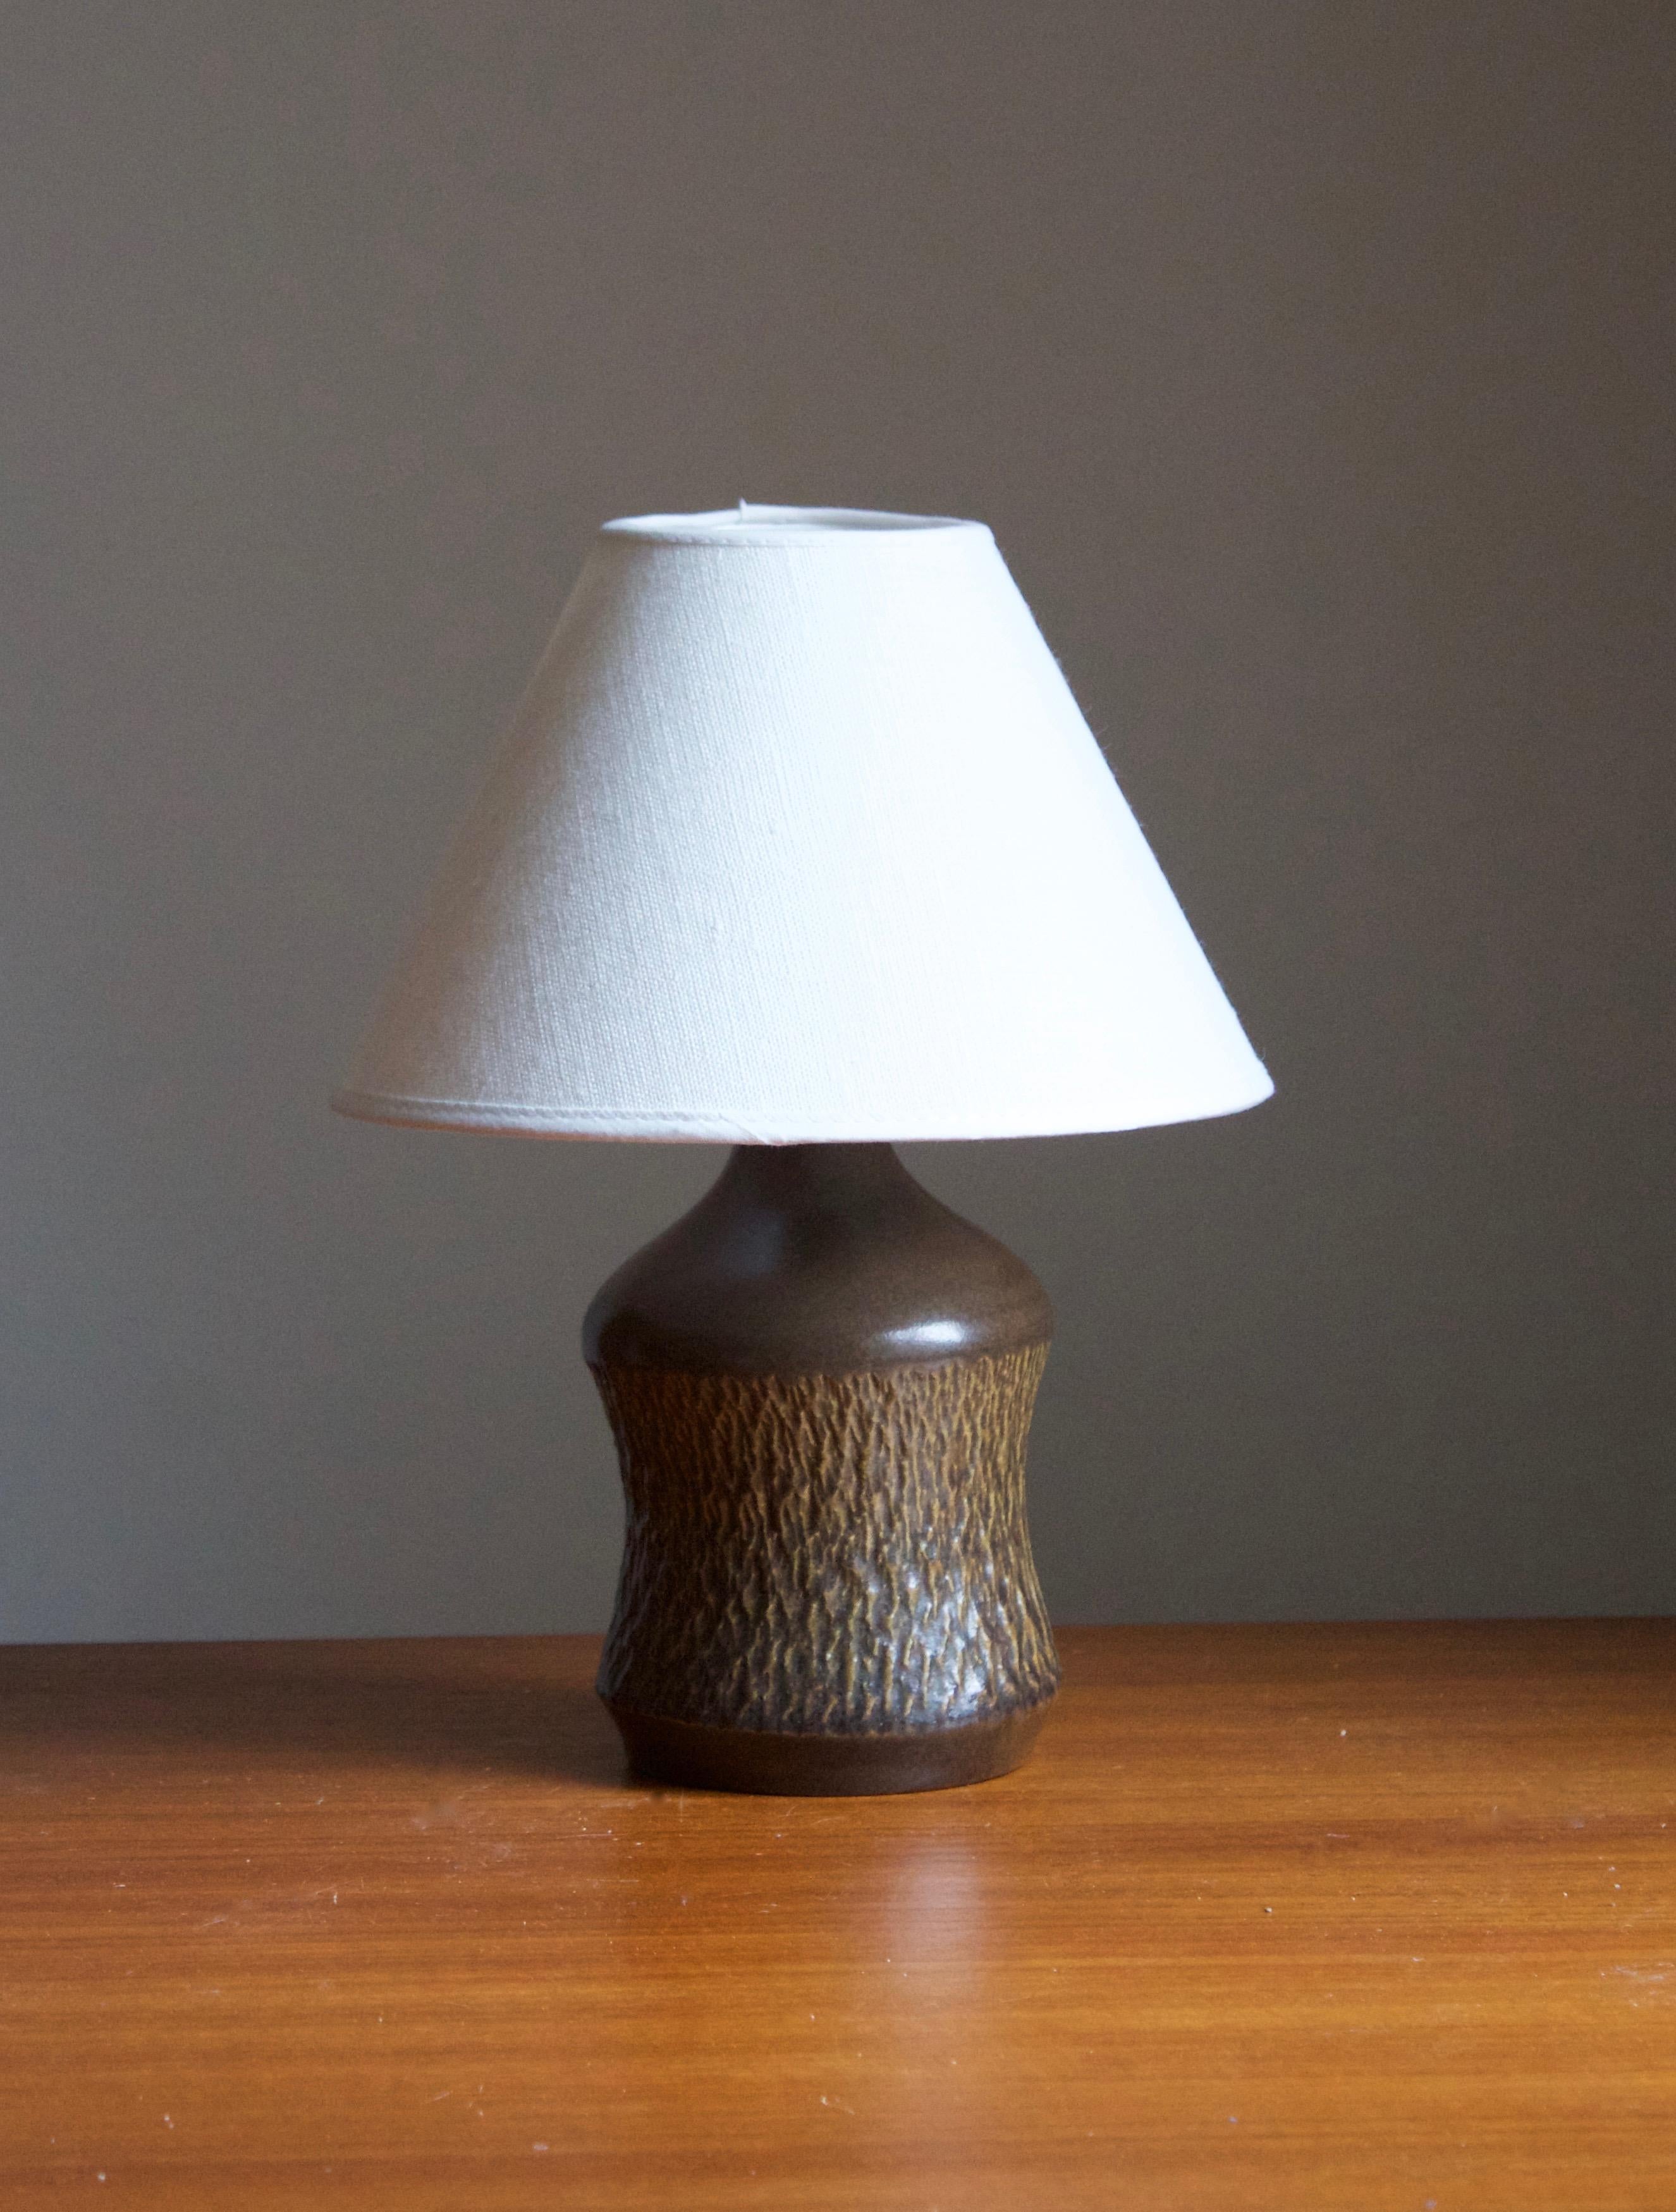 A stoneware table lamp designed by Henry Brandi, and produced by his own firm, Brandi Vejbystrand, Sweden, 1960s. Marked and labeled. 

Stated dimensions exclude lamsphade. Height includes socket. Shade is not included in purchase.

Glaze features a